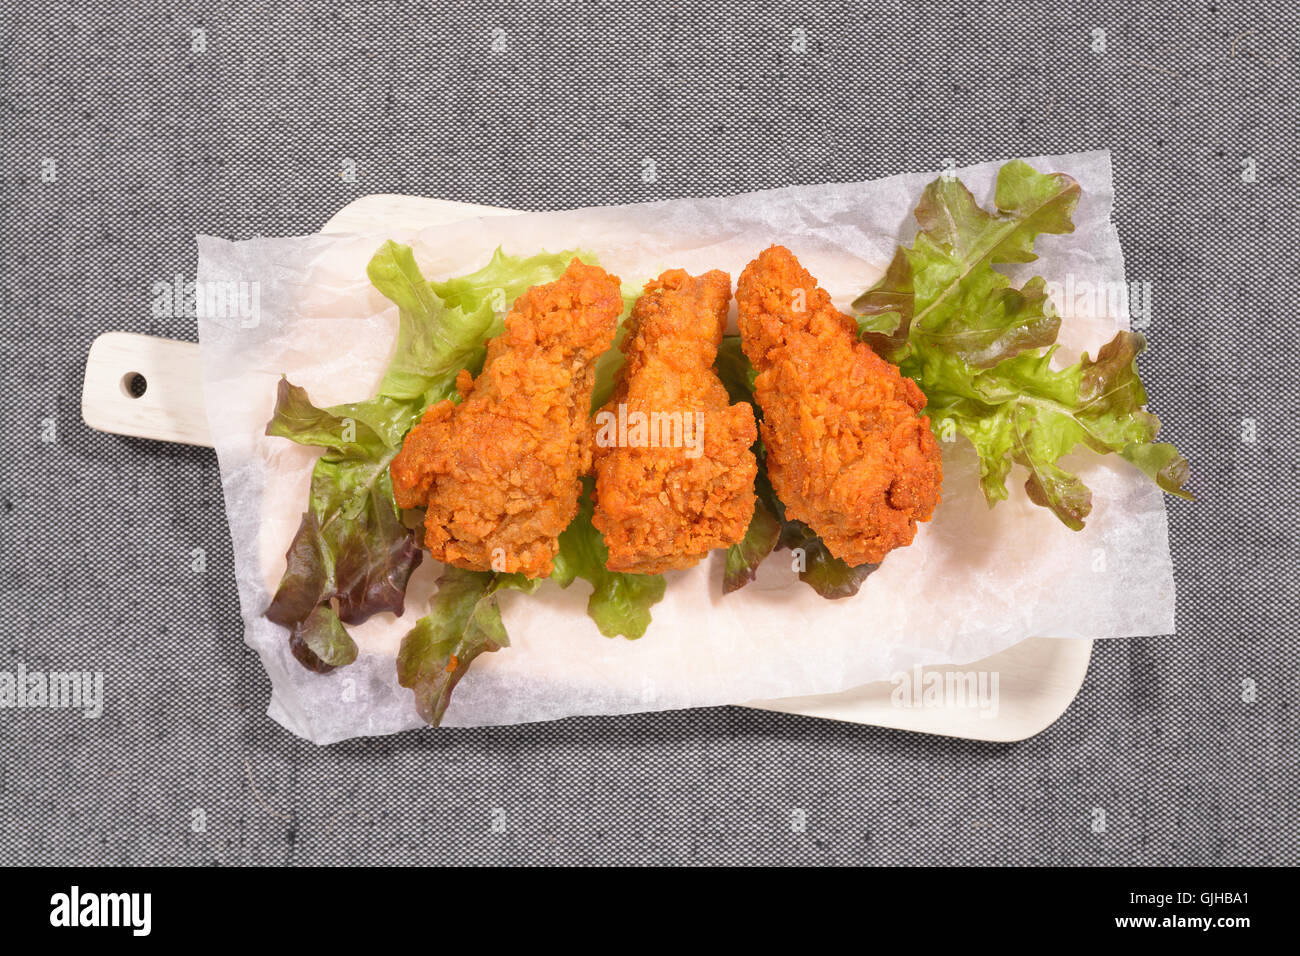 Fried chicken wing Stock Photo